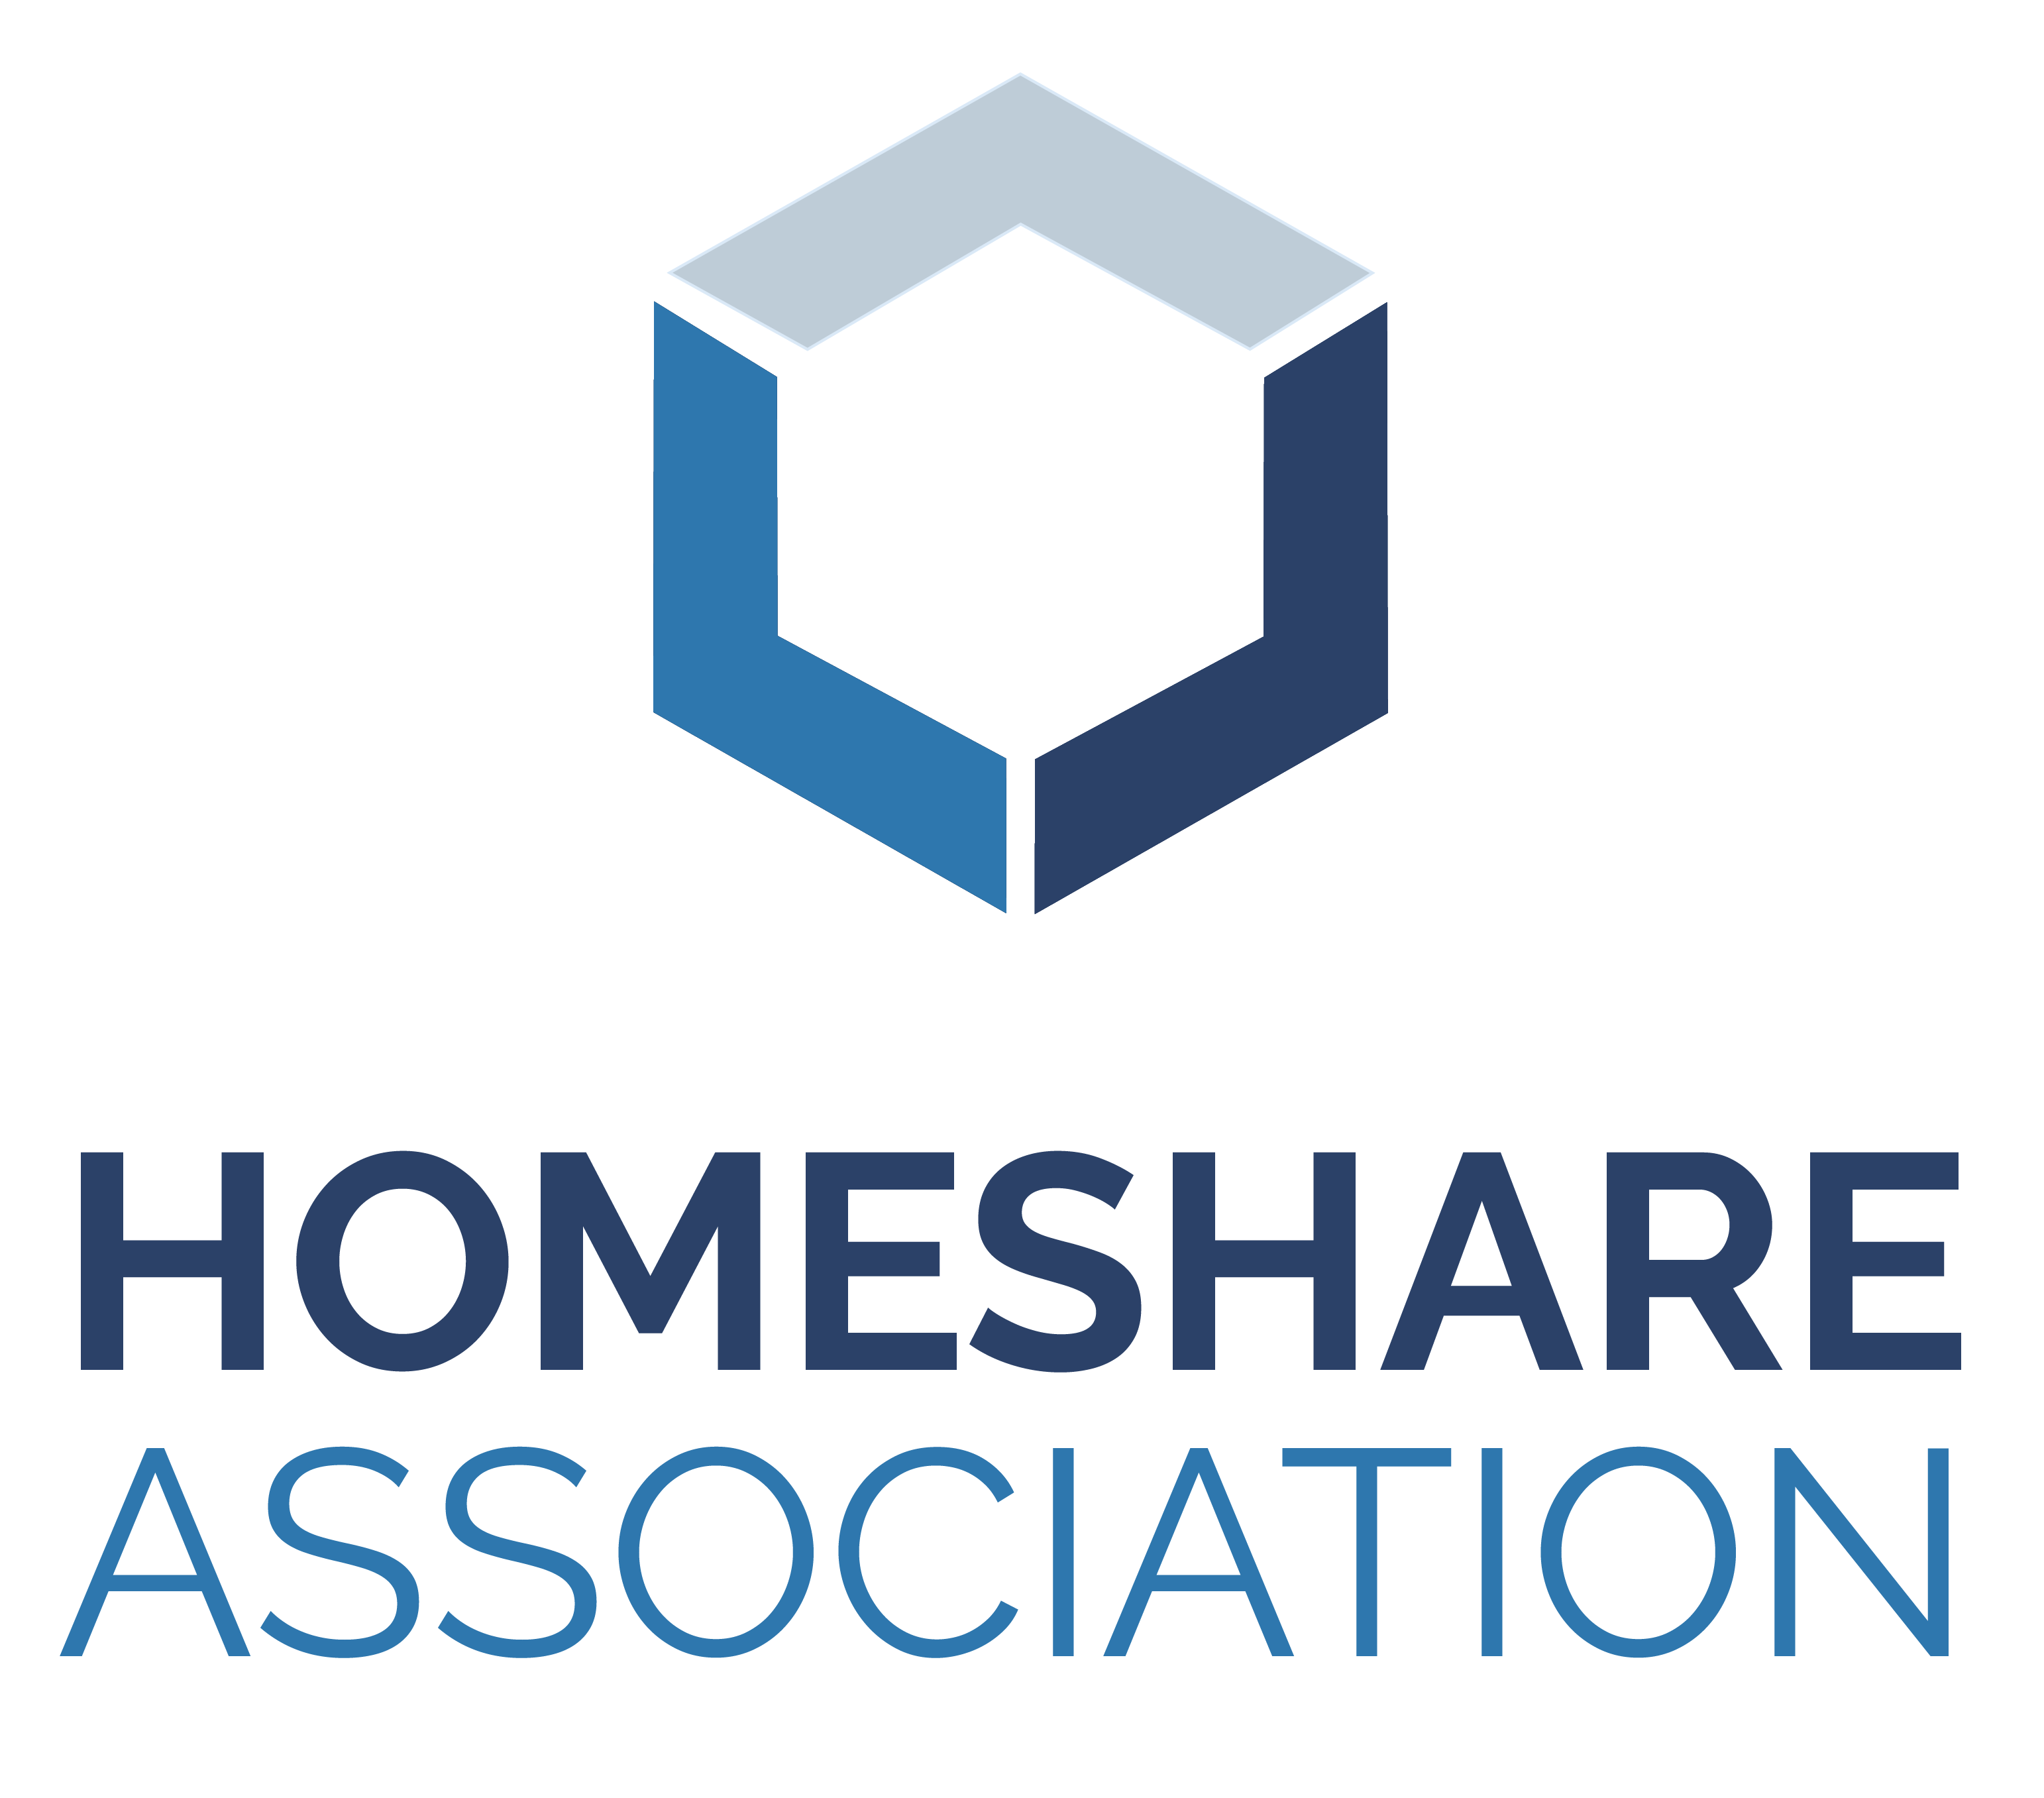 Launch of Homeshare Association to support health and social care featured image